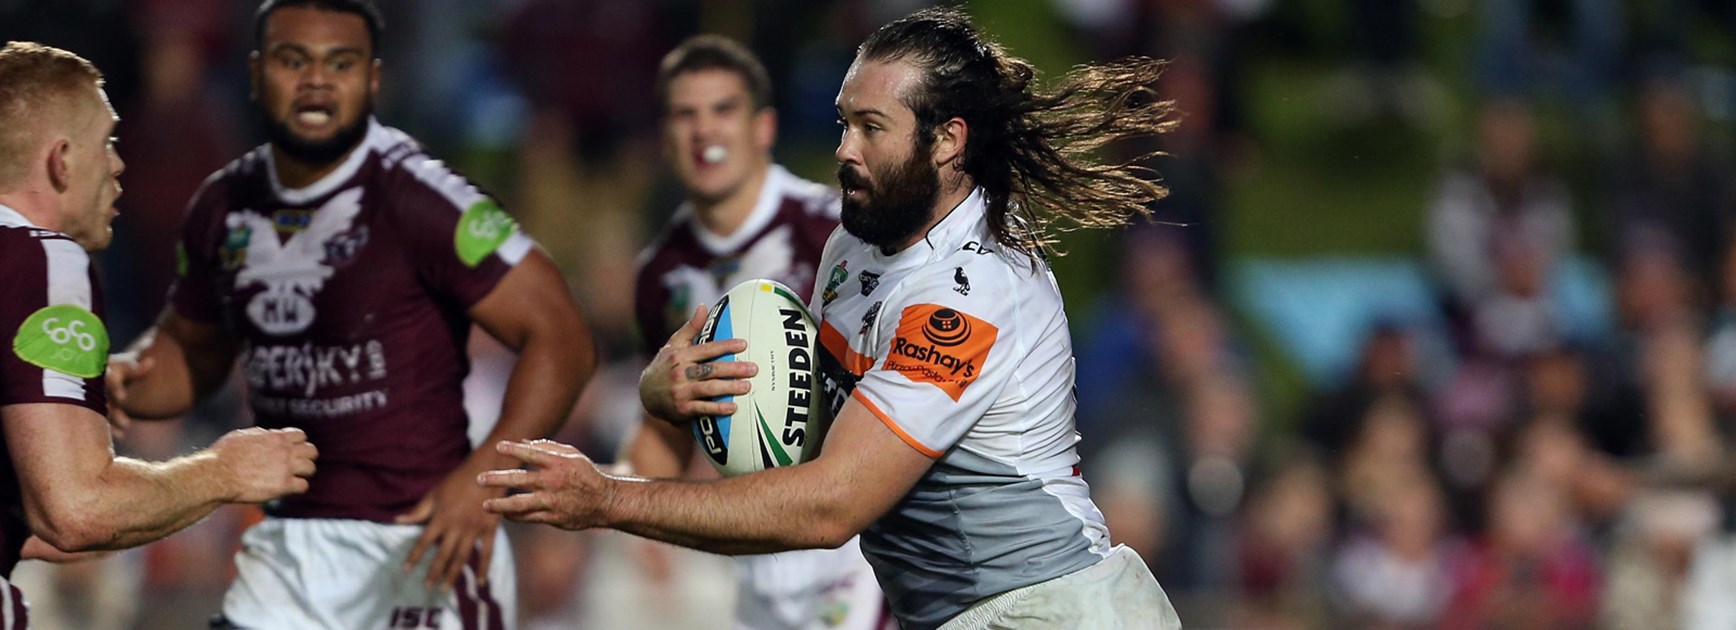 Wests Tigers prop Aaron Woods charges forward during his side's clash with Manly at Brookvale Oval.